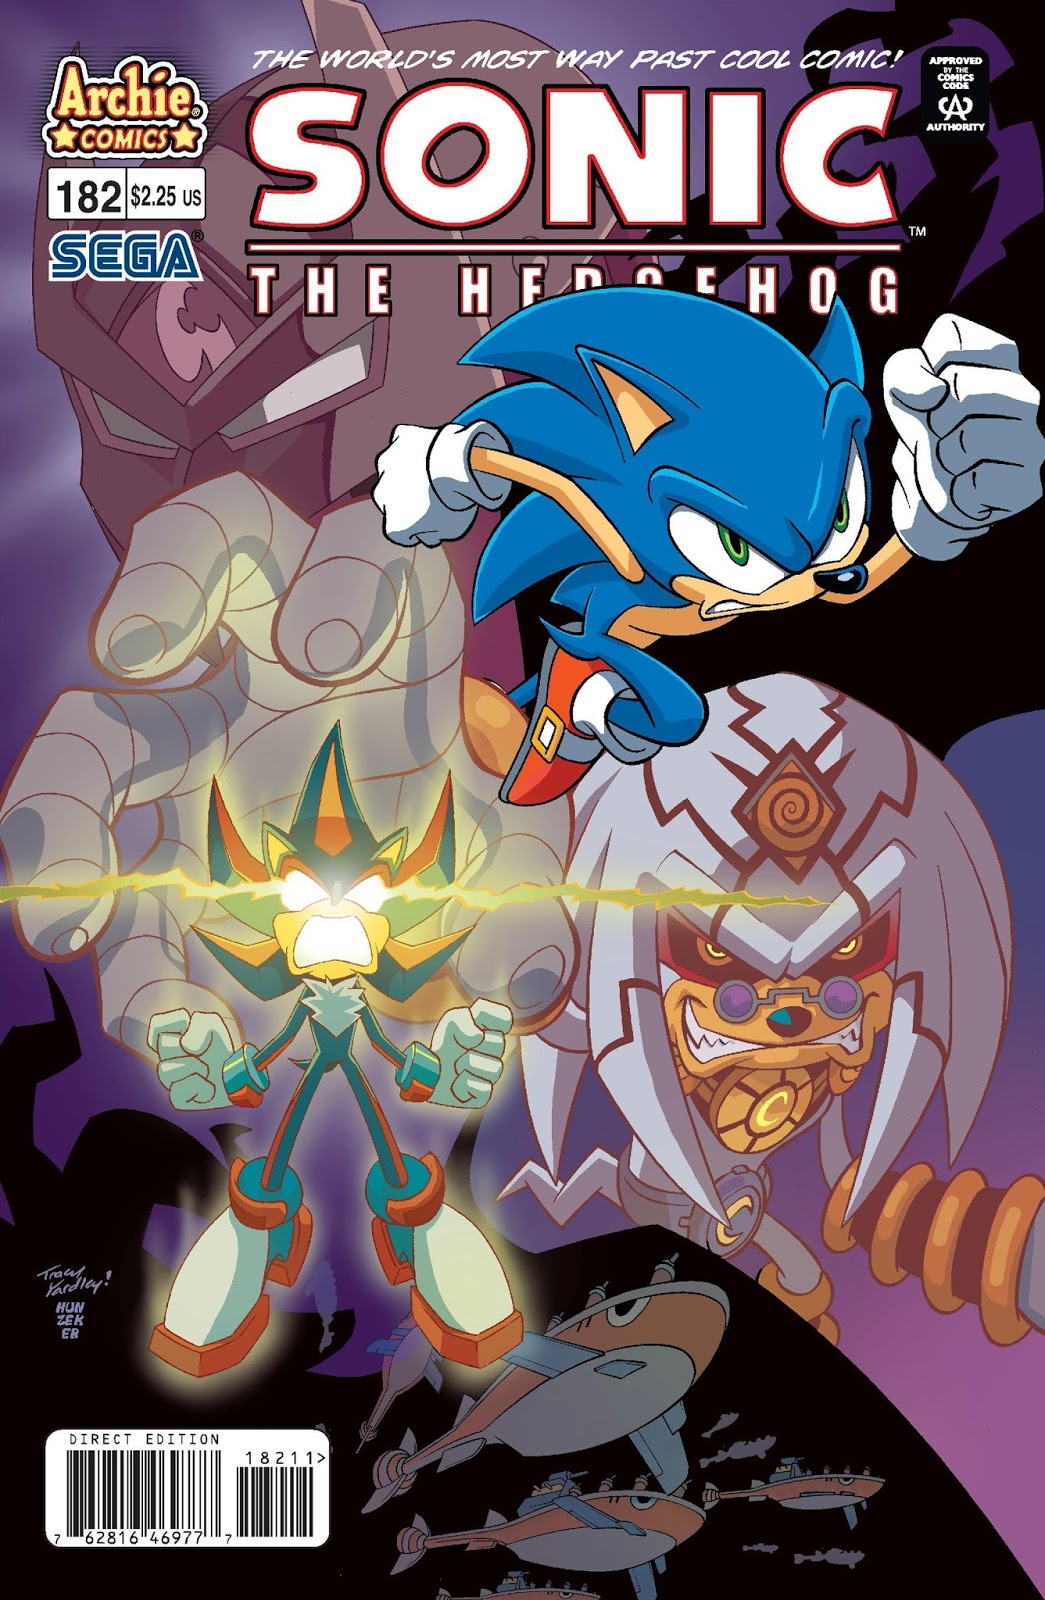 Hedgehogs Can't Swim: Sonic the Hedgehog: Issue 181